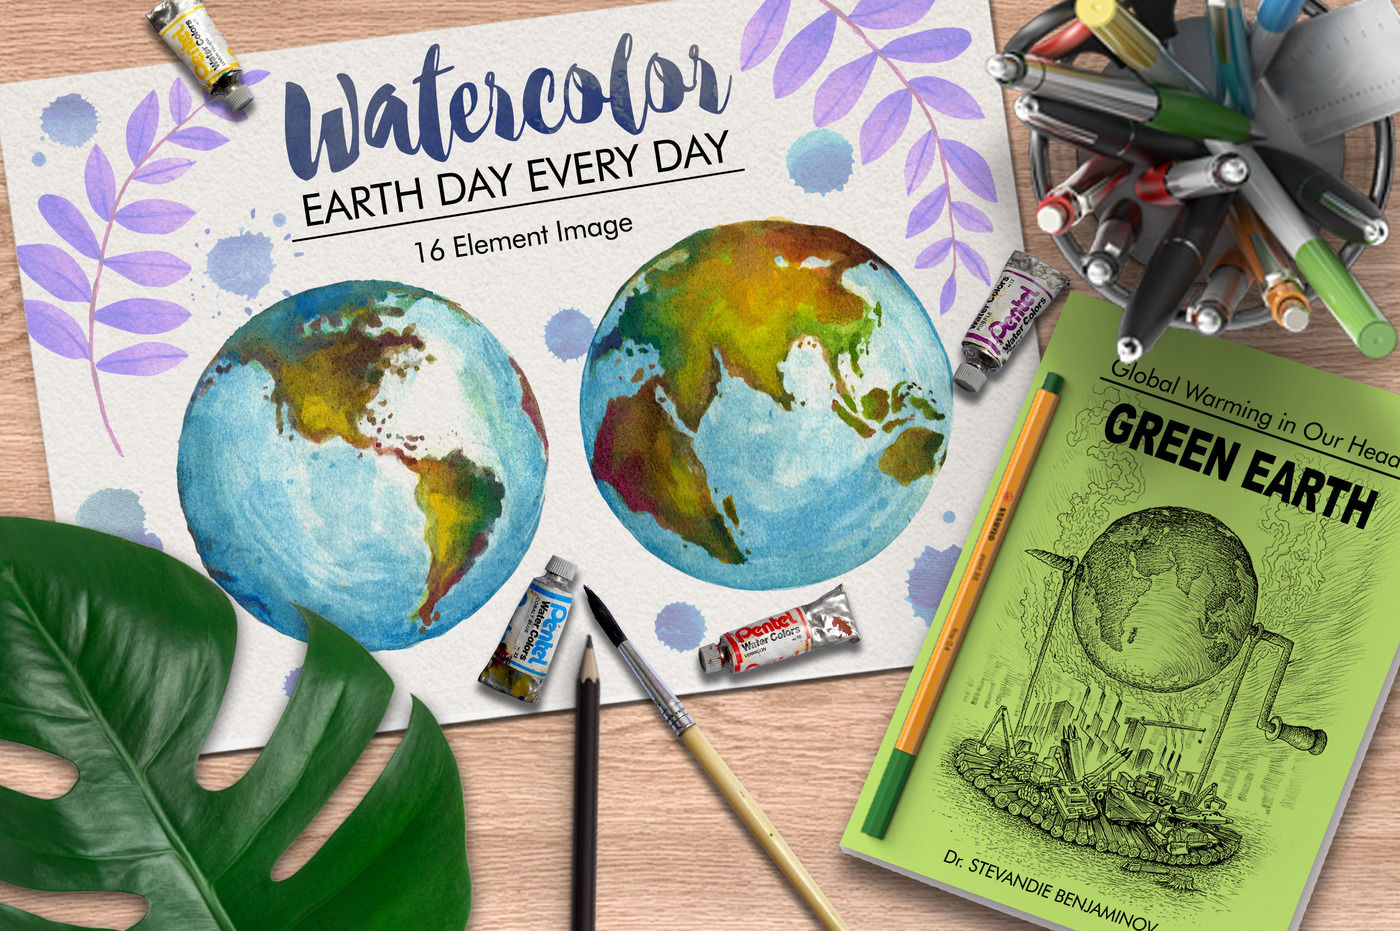 how to make environment day poster drawing - YouTube | Poster drawing,  Drawings, Easy drawings